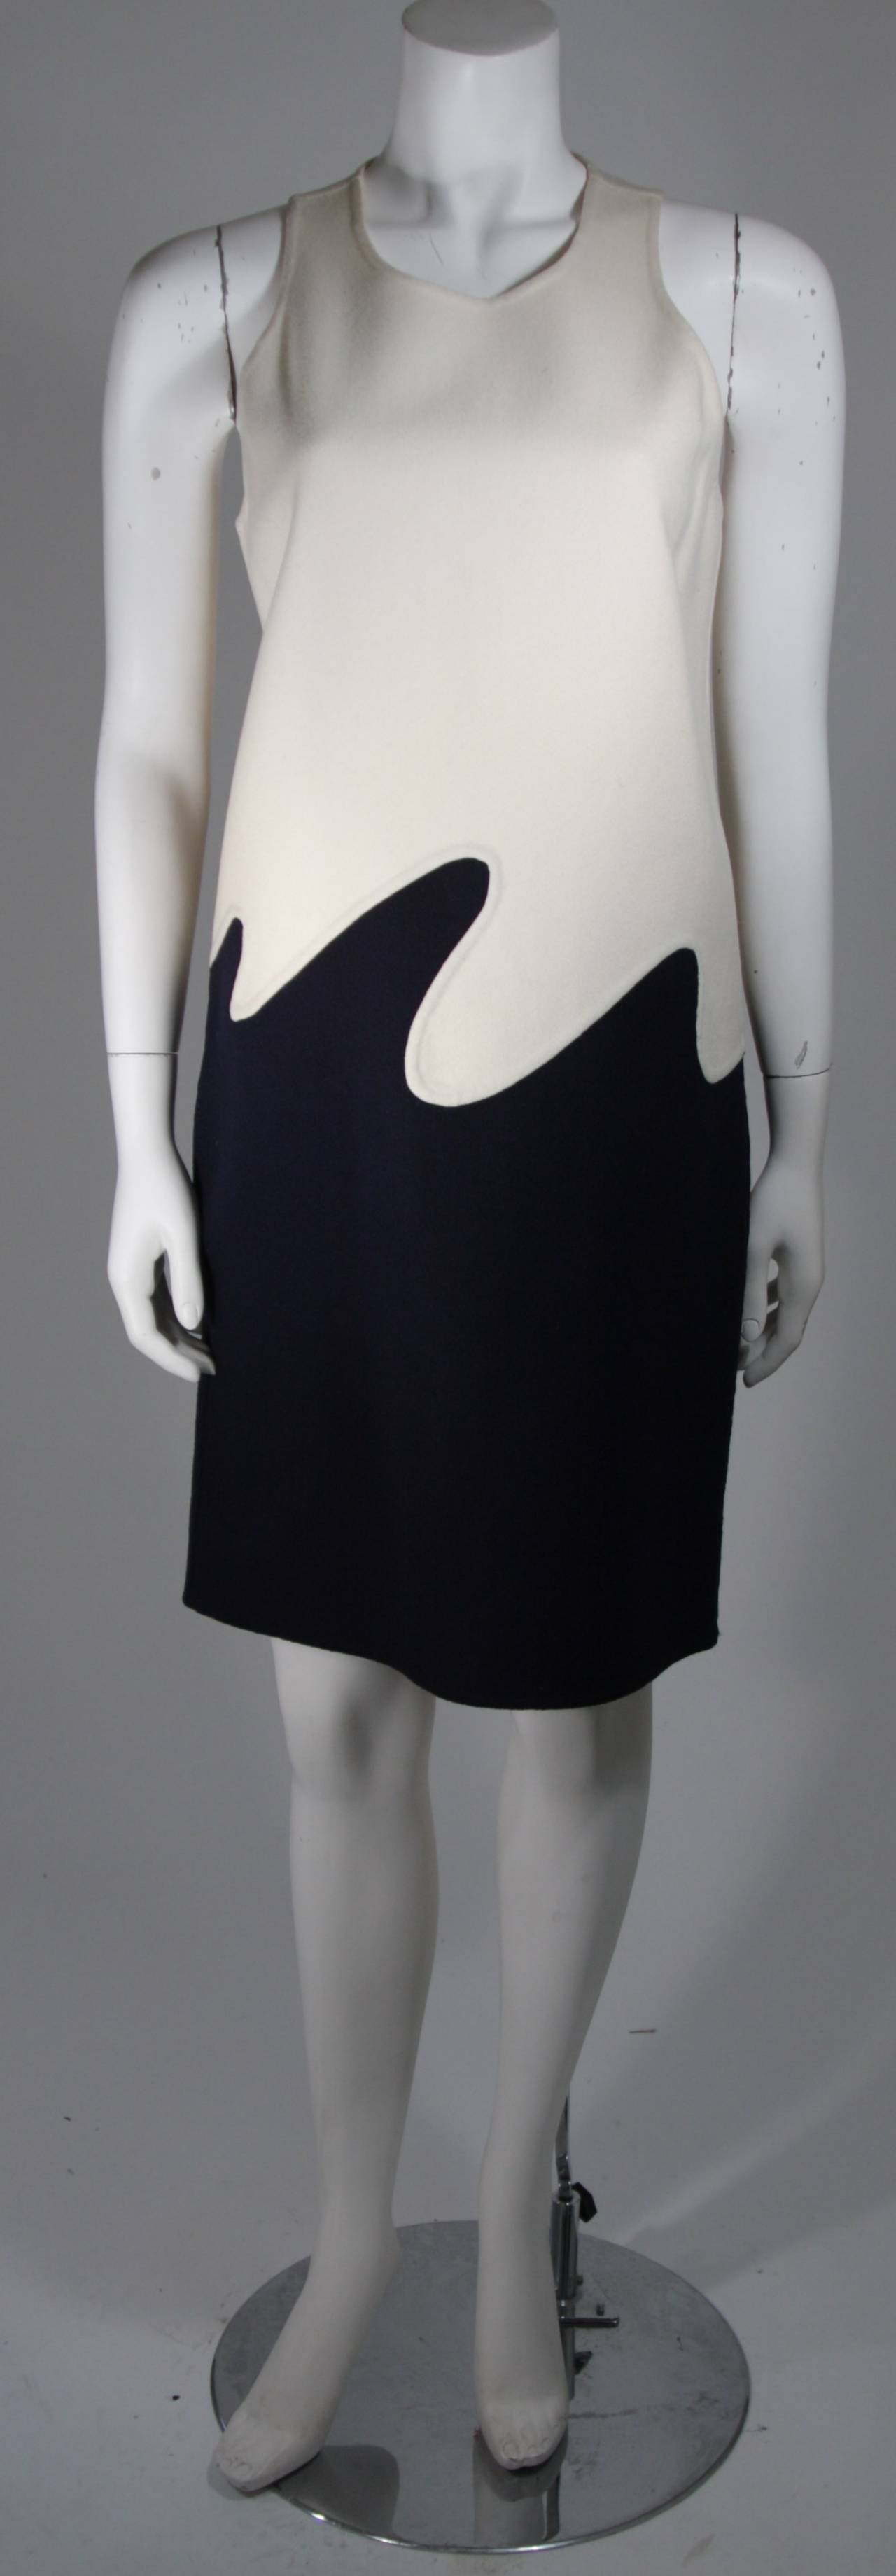 This 1960's dress is composed of medium weight felted wool in a cream and navy color story. The wonderful shift style design is complimented by the wave conjoining seam line construction, merging and melding the contrasting hues. There is a center